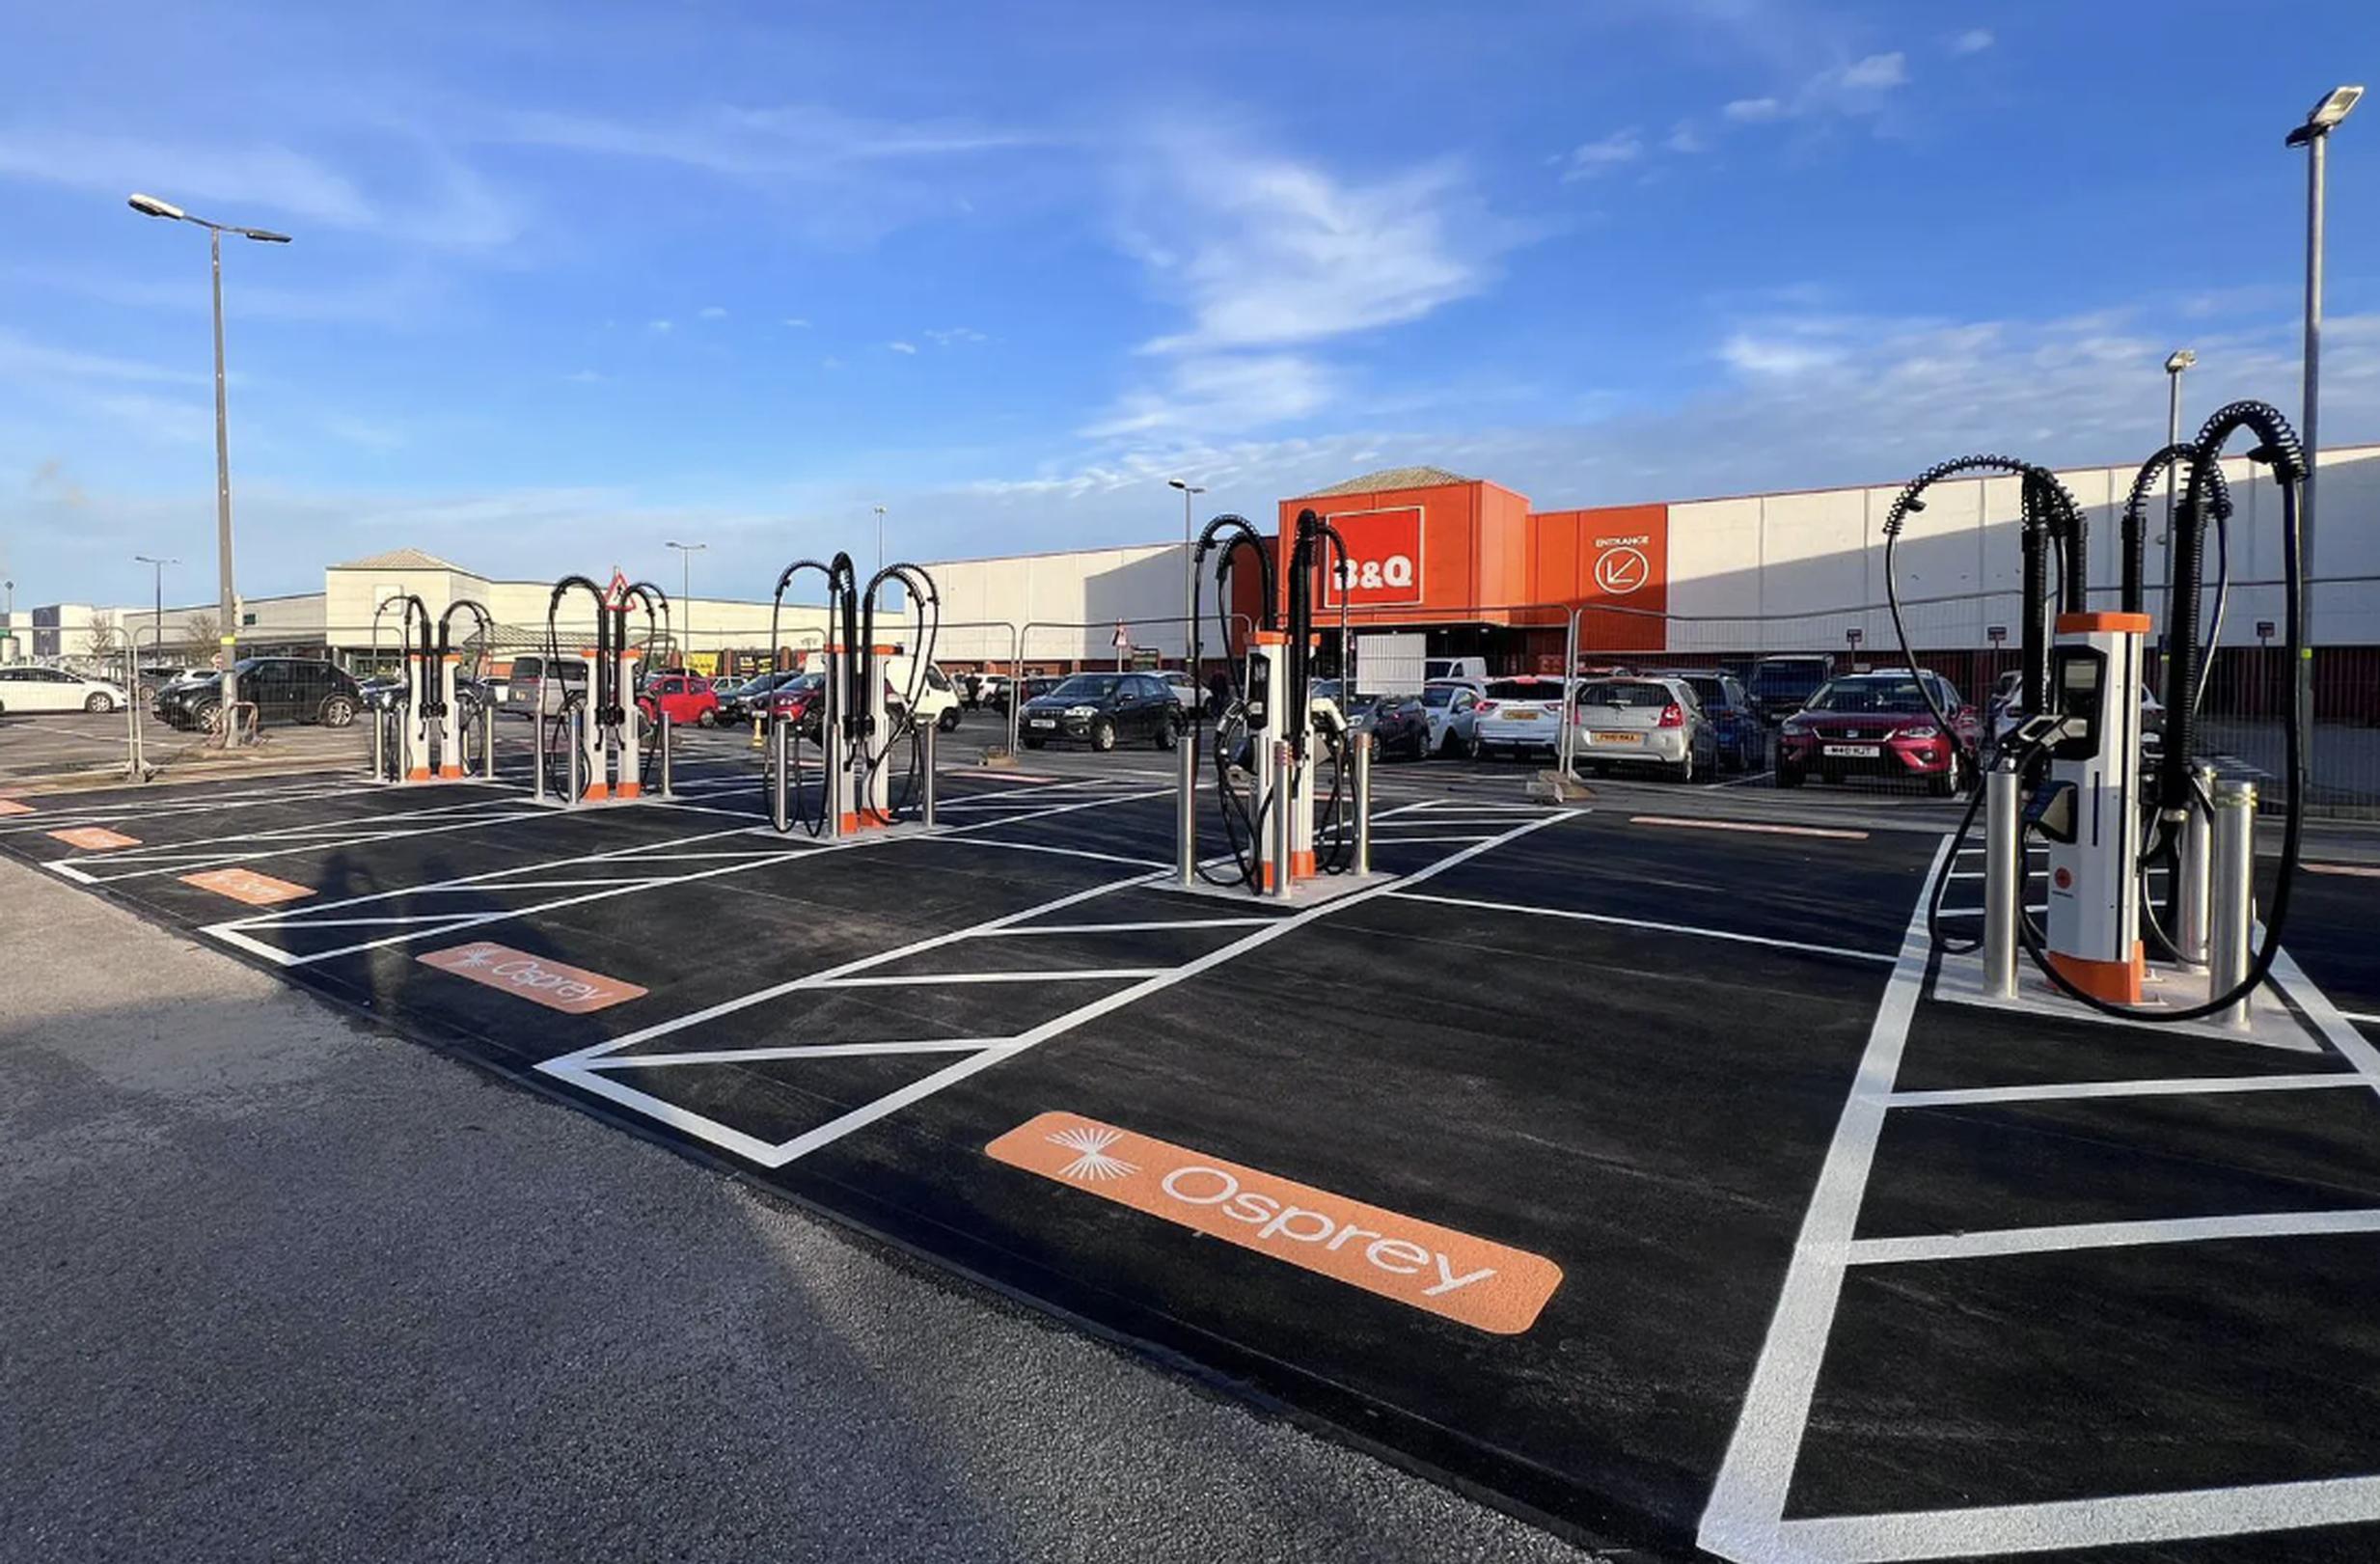 16 high-powered EV chargers have been installed at the Derwent Drive Retail Park